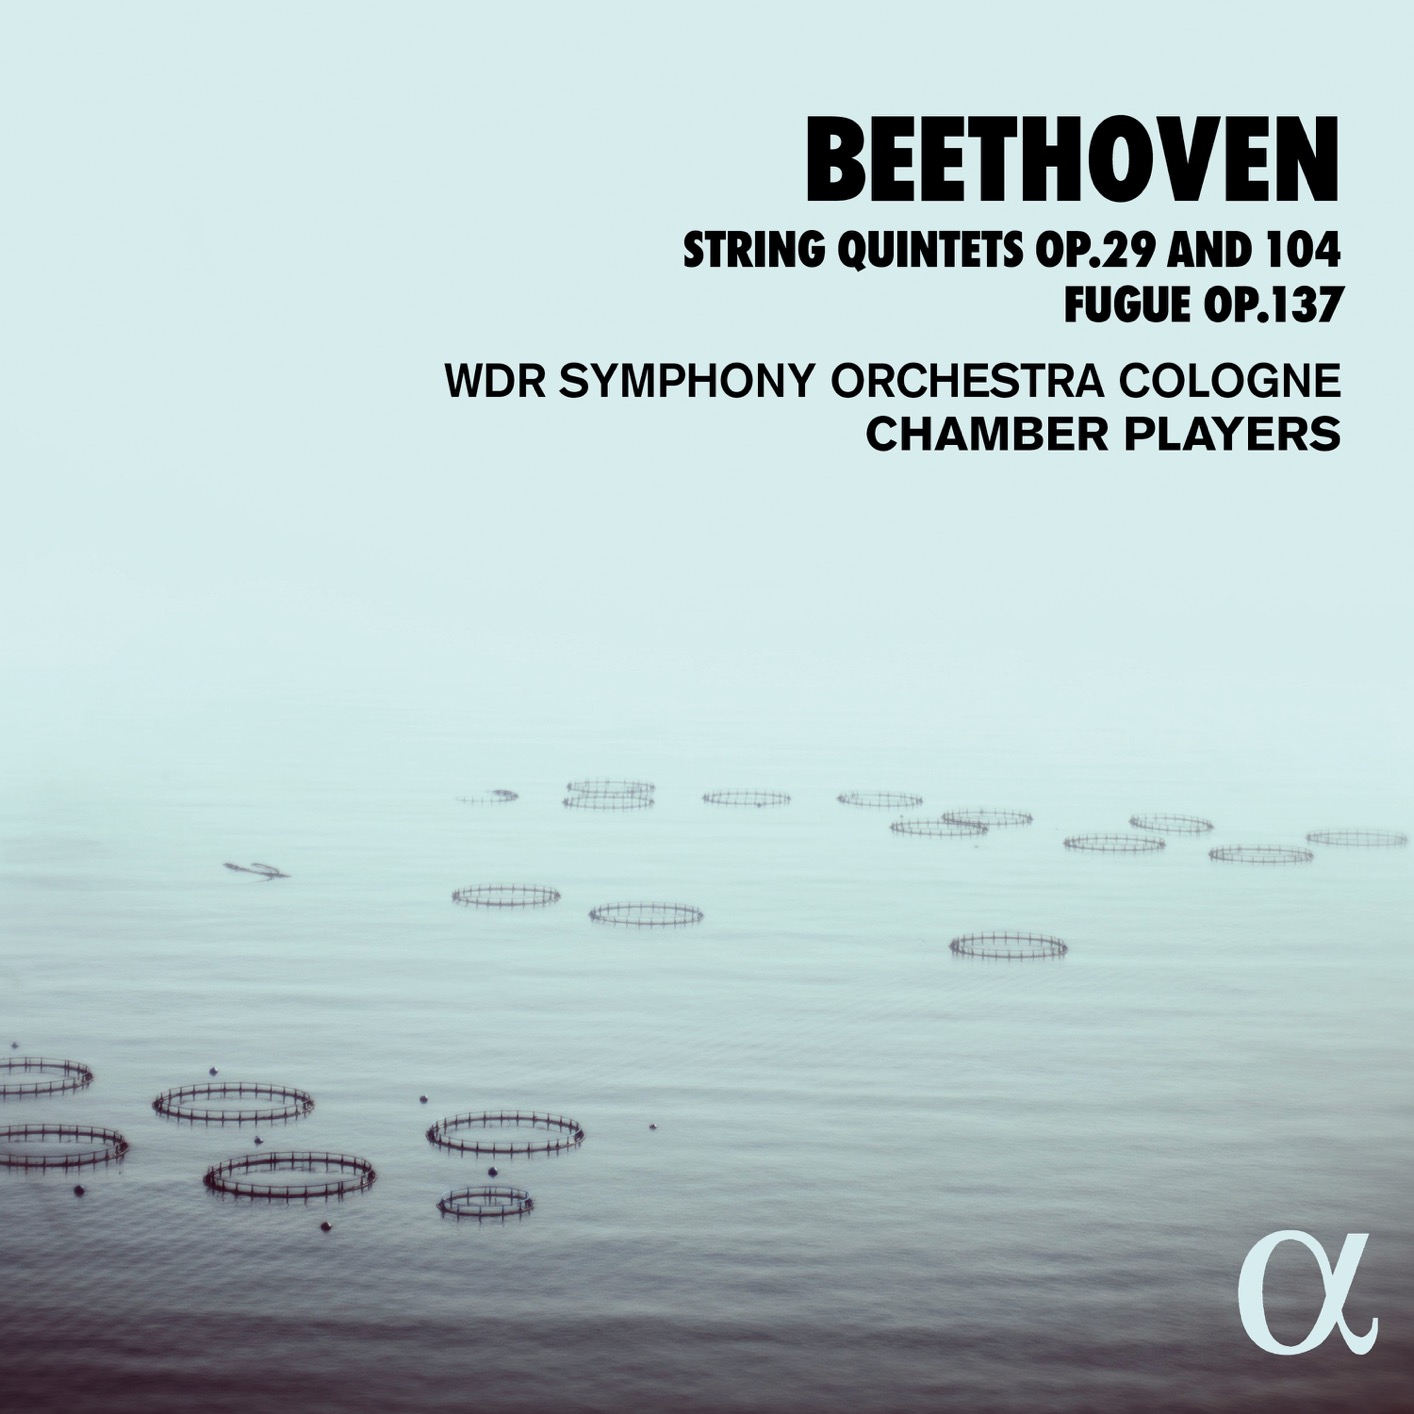 WDR Symphony Orchestra Cologne Chamber Players – Beethoven: String Quintets Op. 29 and 104, Fugue Op. 137 (2020) [FLAC 24bit/48kHz]